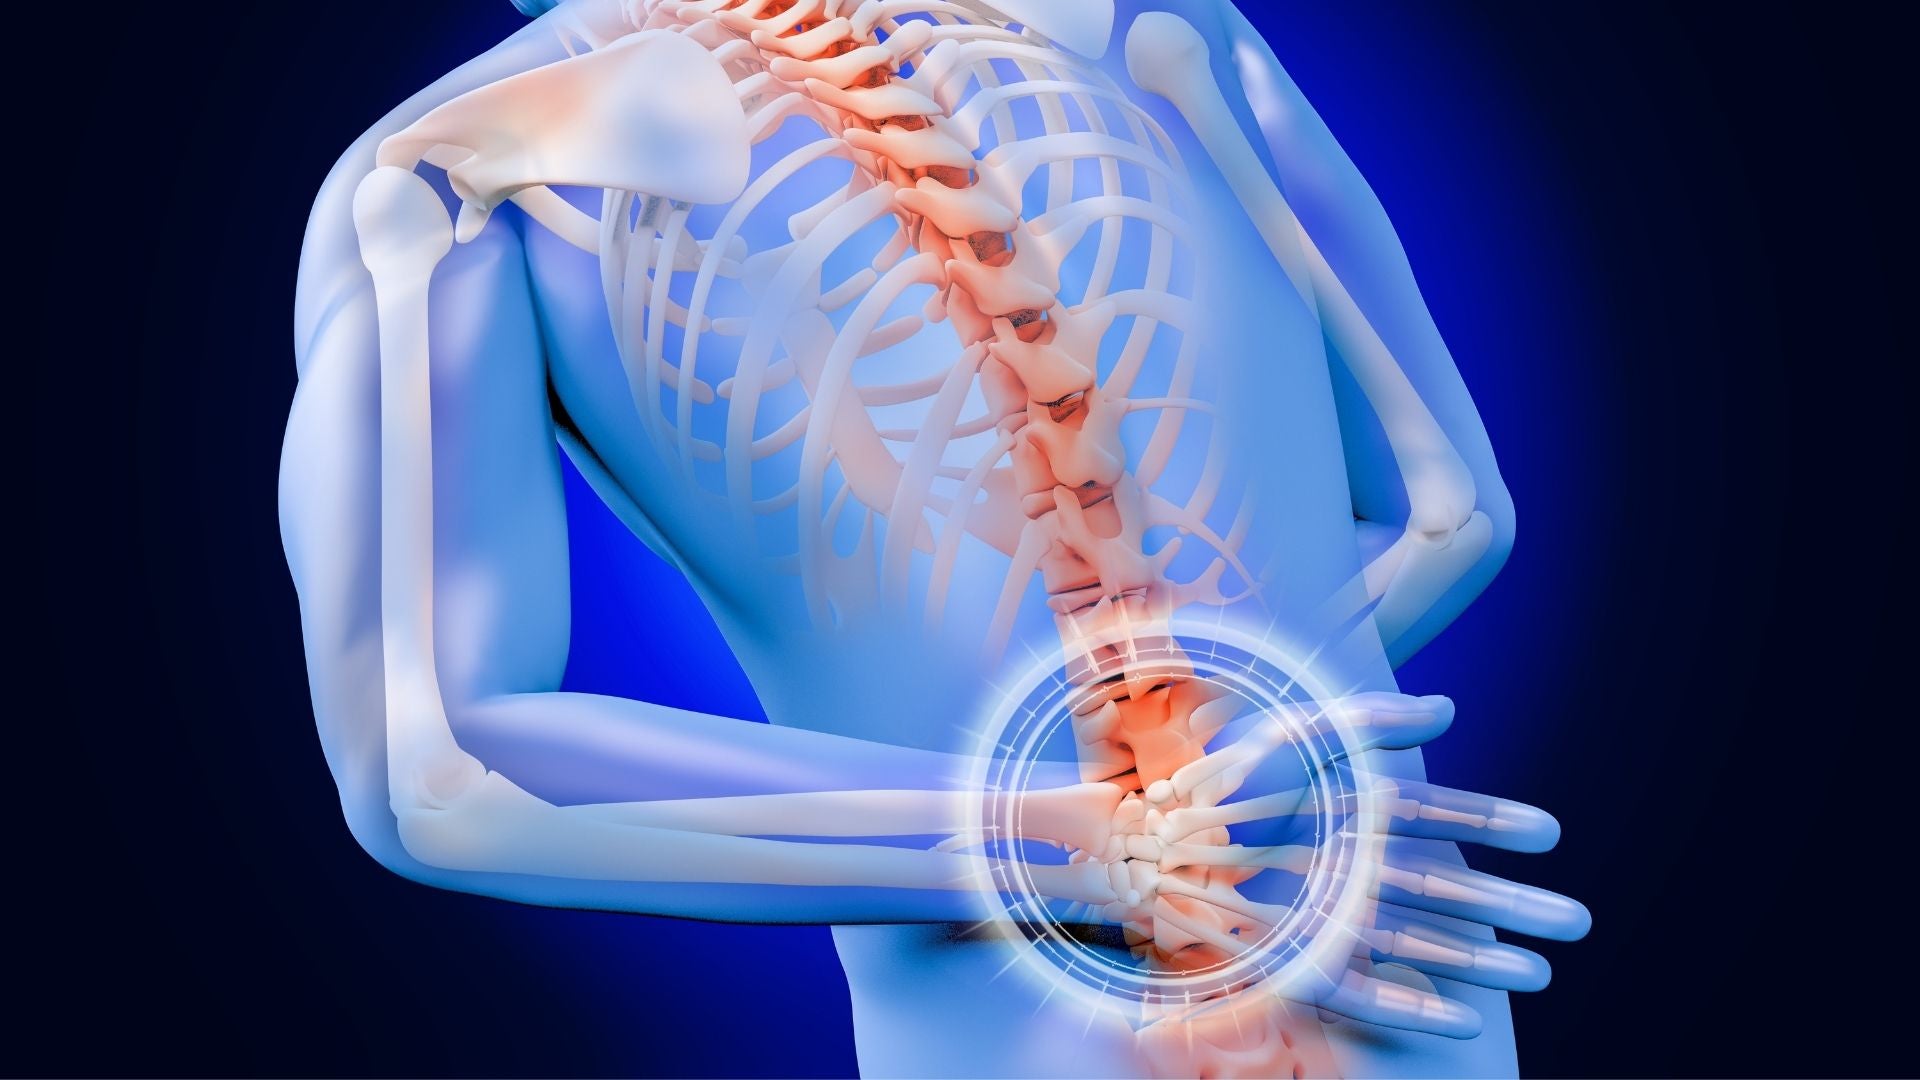 Do You Know How Back Pain Starts?